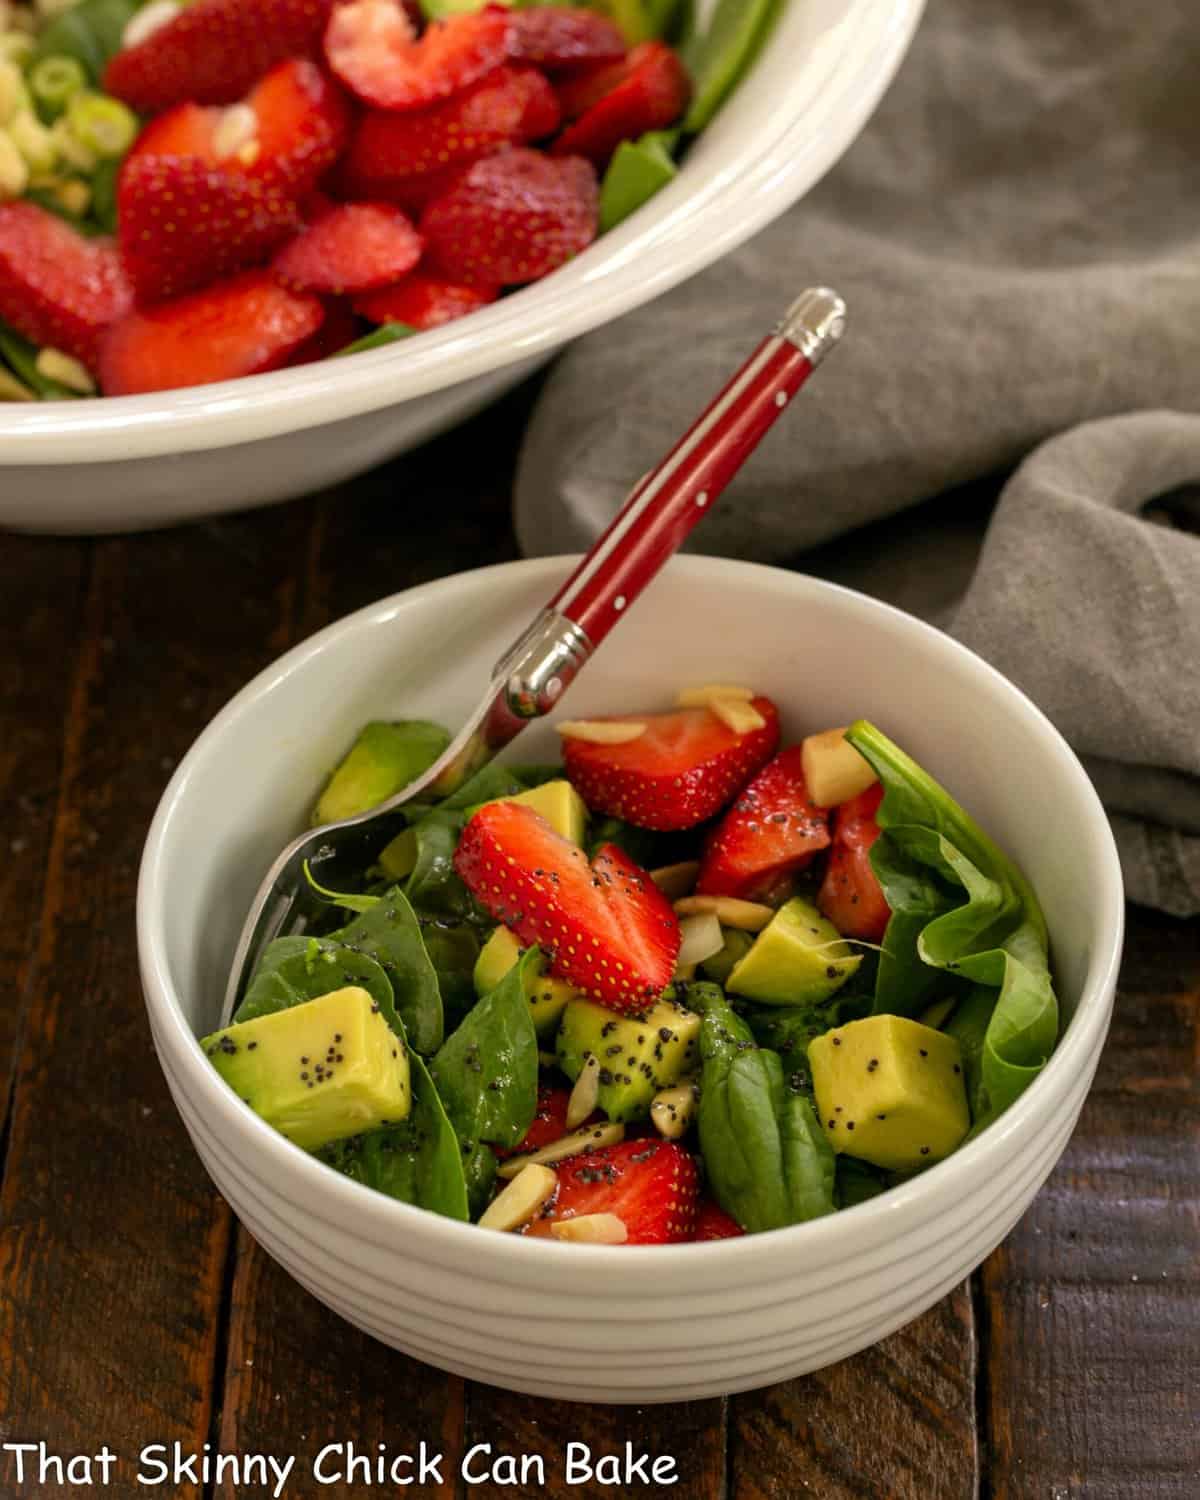 Spinach salad in a small white ceramic bowl with a red handled fork.